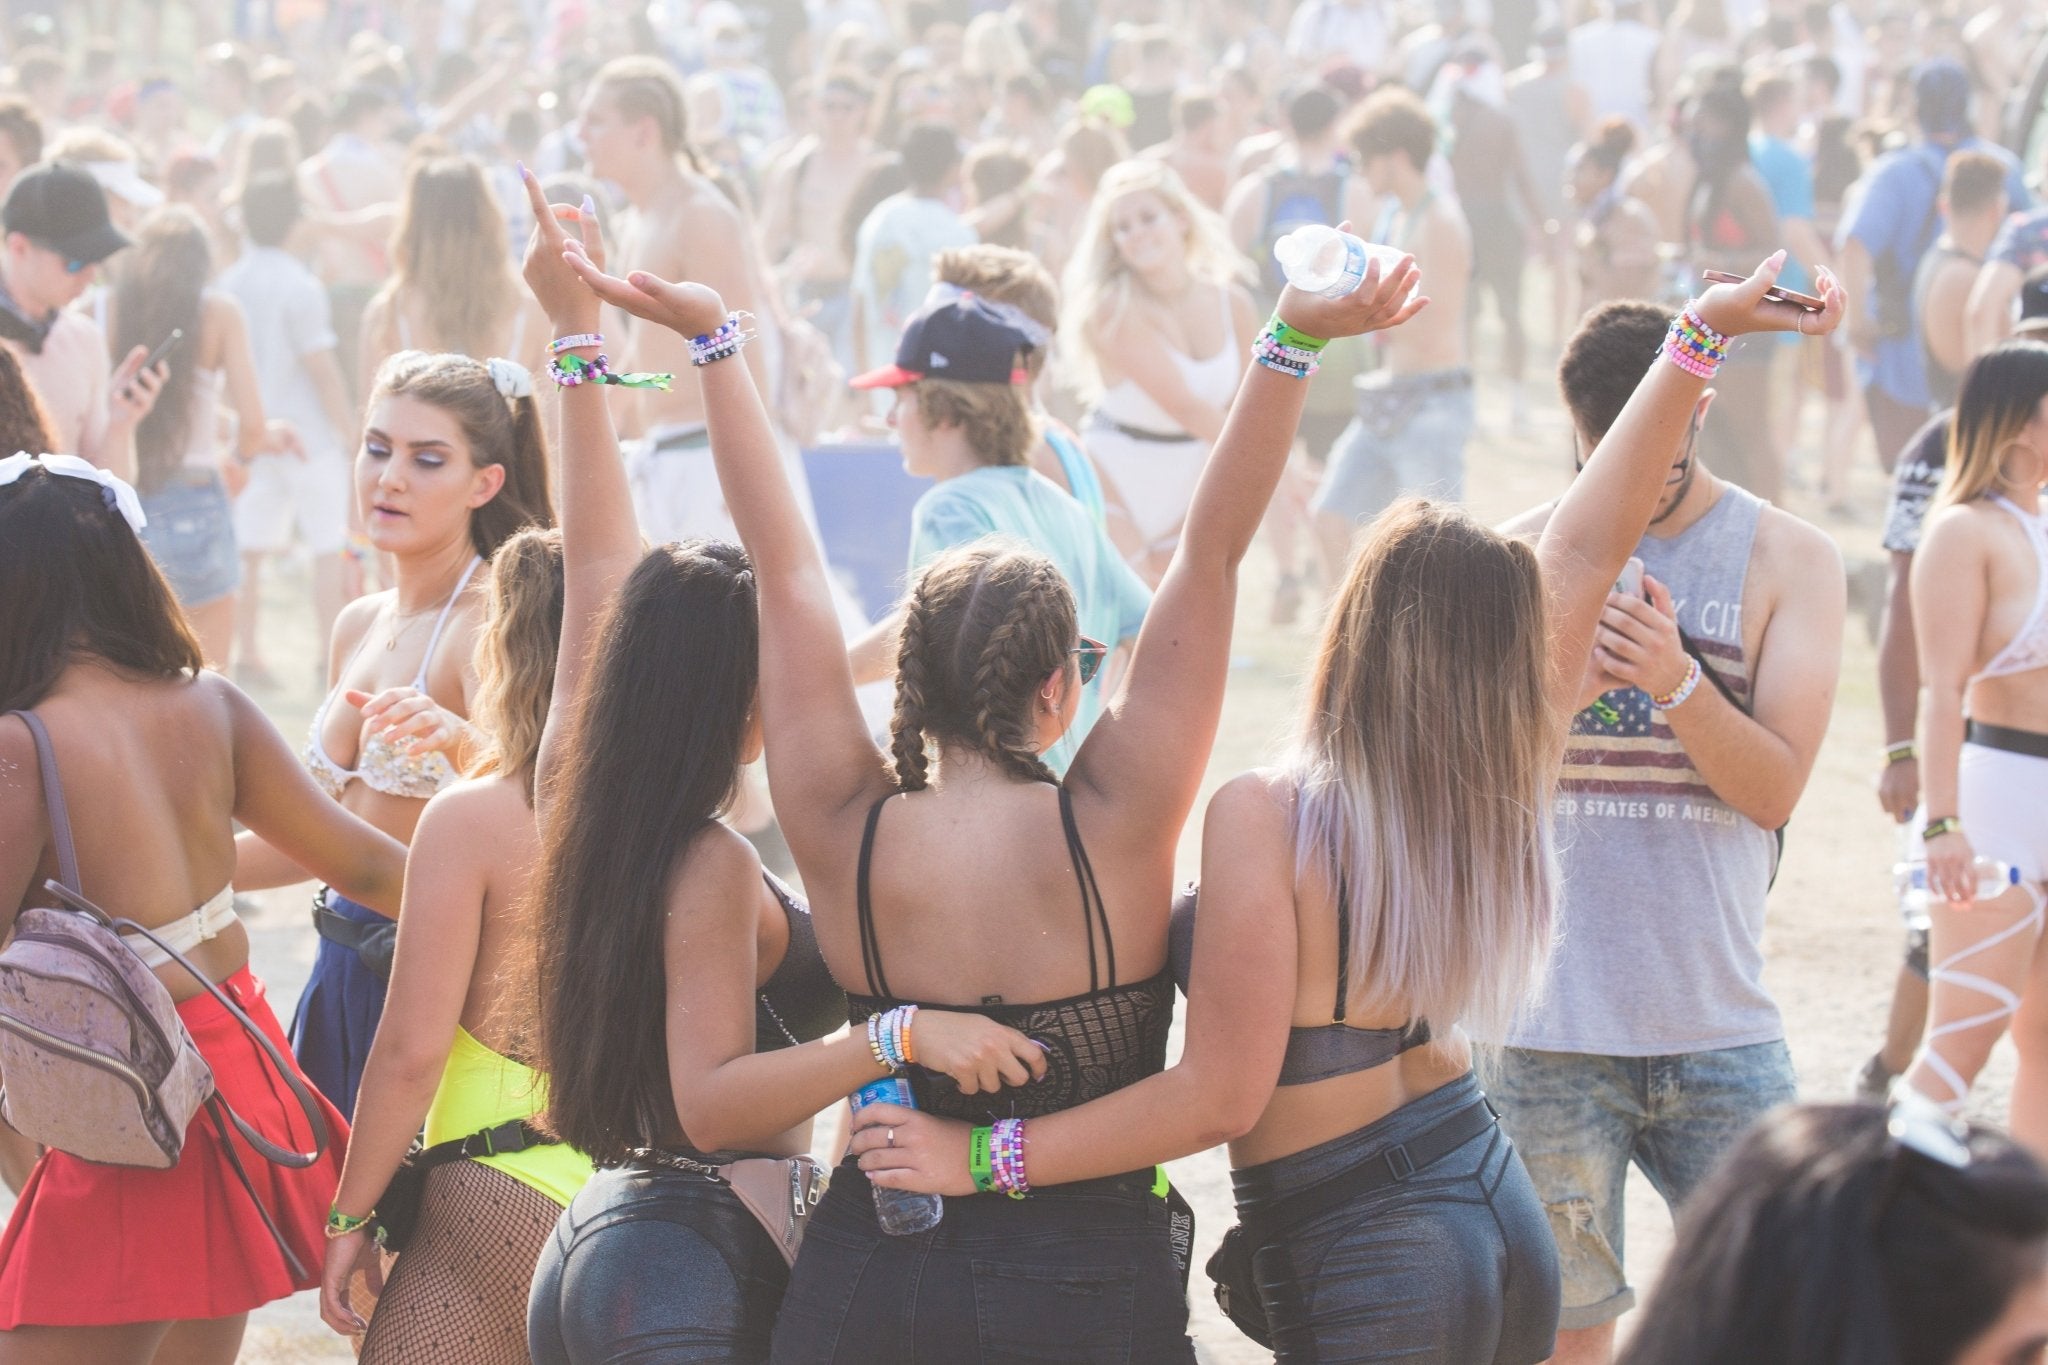 Music Festival Fashion Trends Over the Years - A Store On Jupiter 